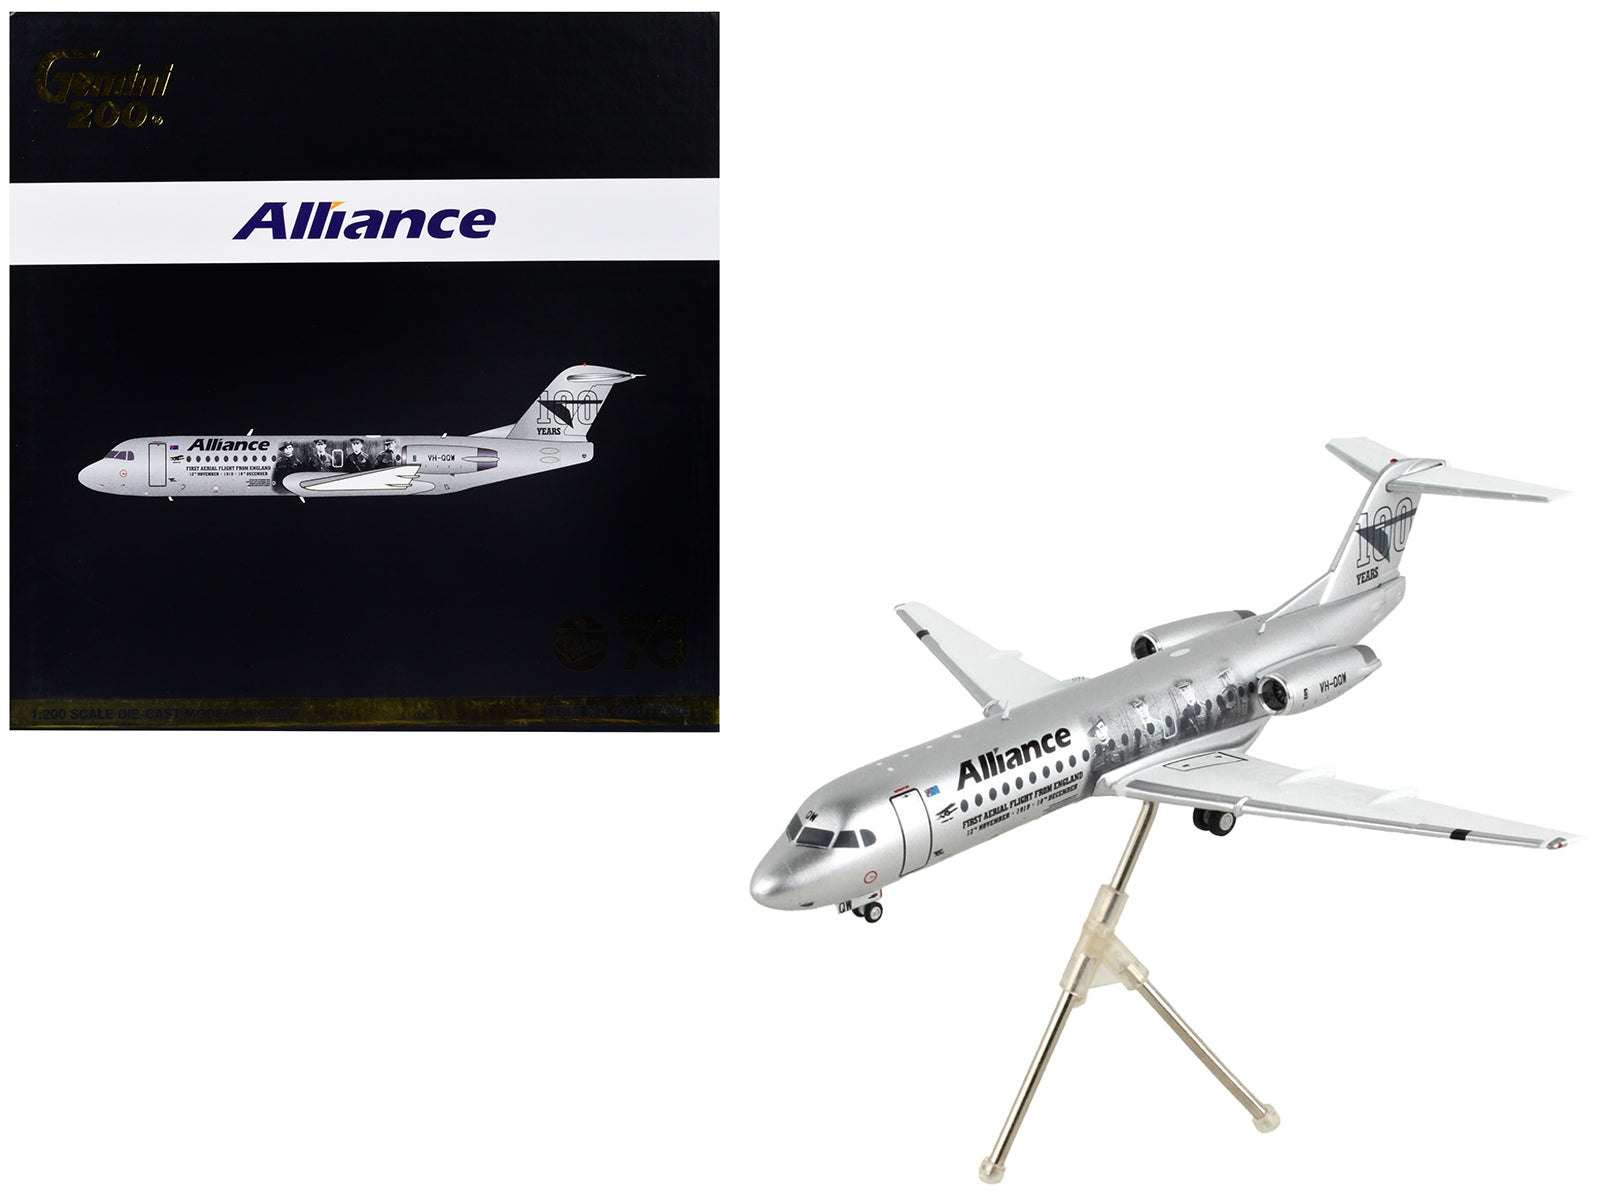 Fokker F70 Commercial Aircraft "Alliance Airlines - 100 Years First Flight from England" Silver Metallic "Gemini 200"